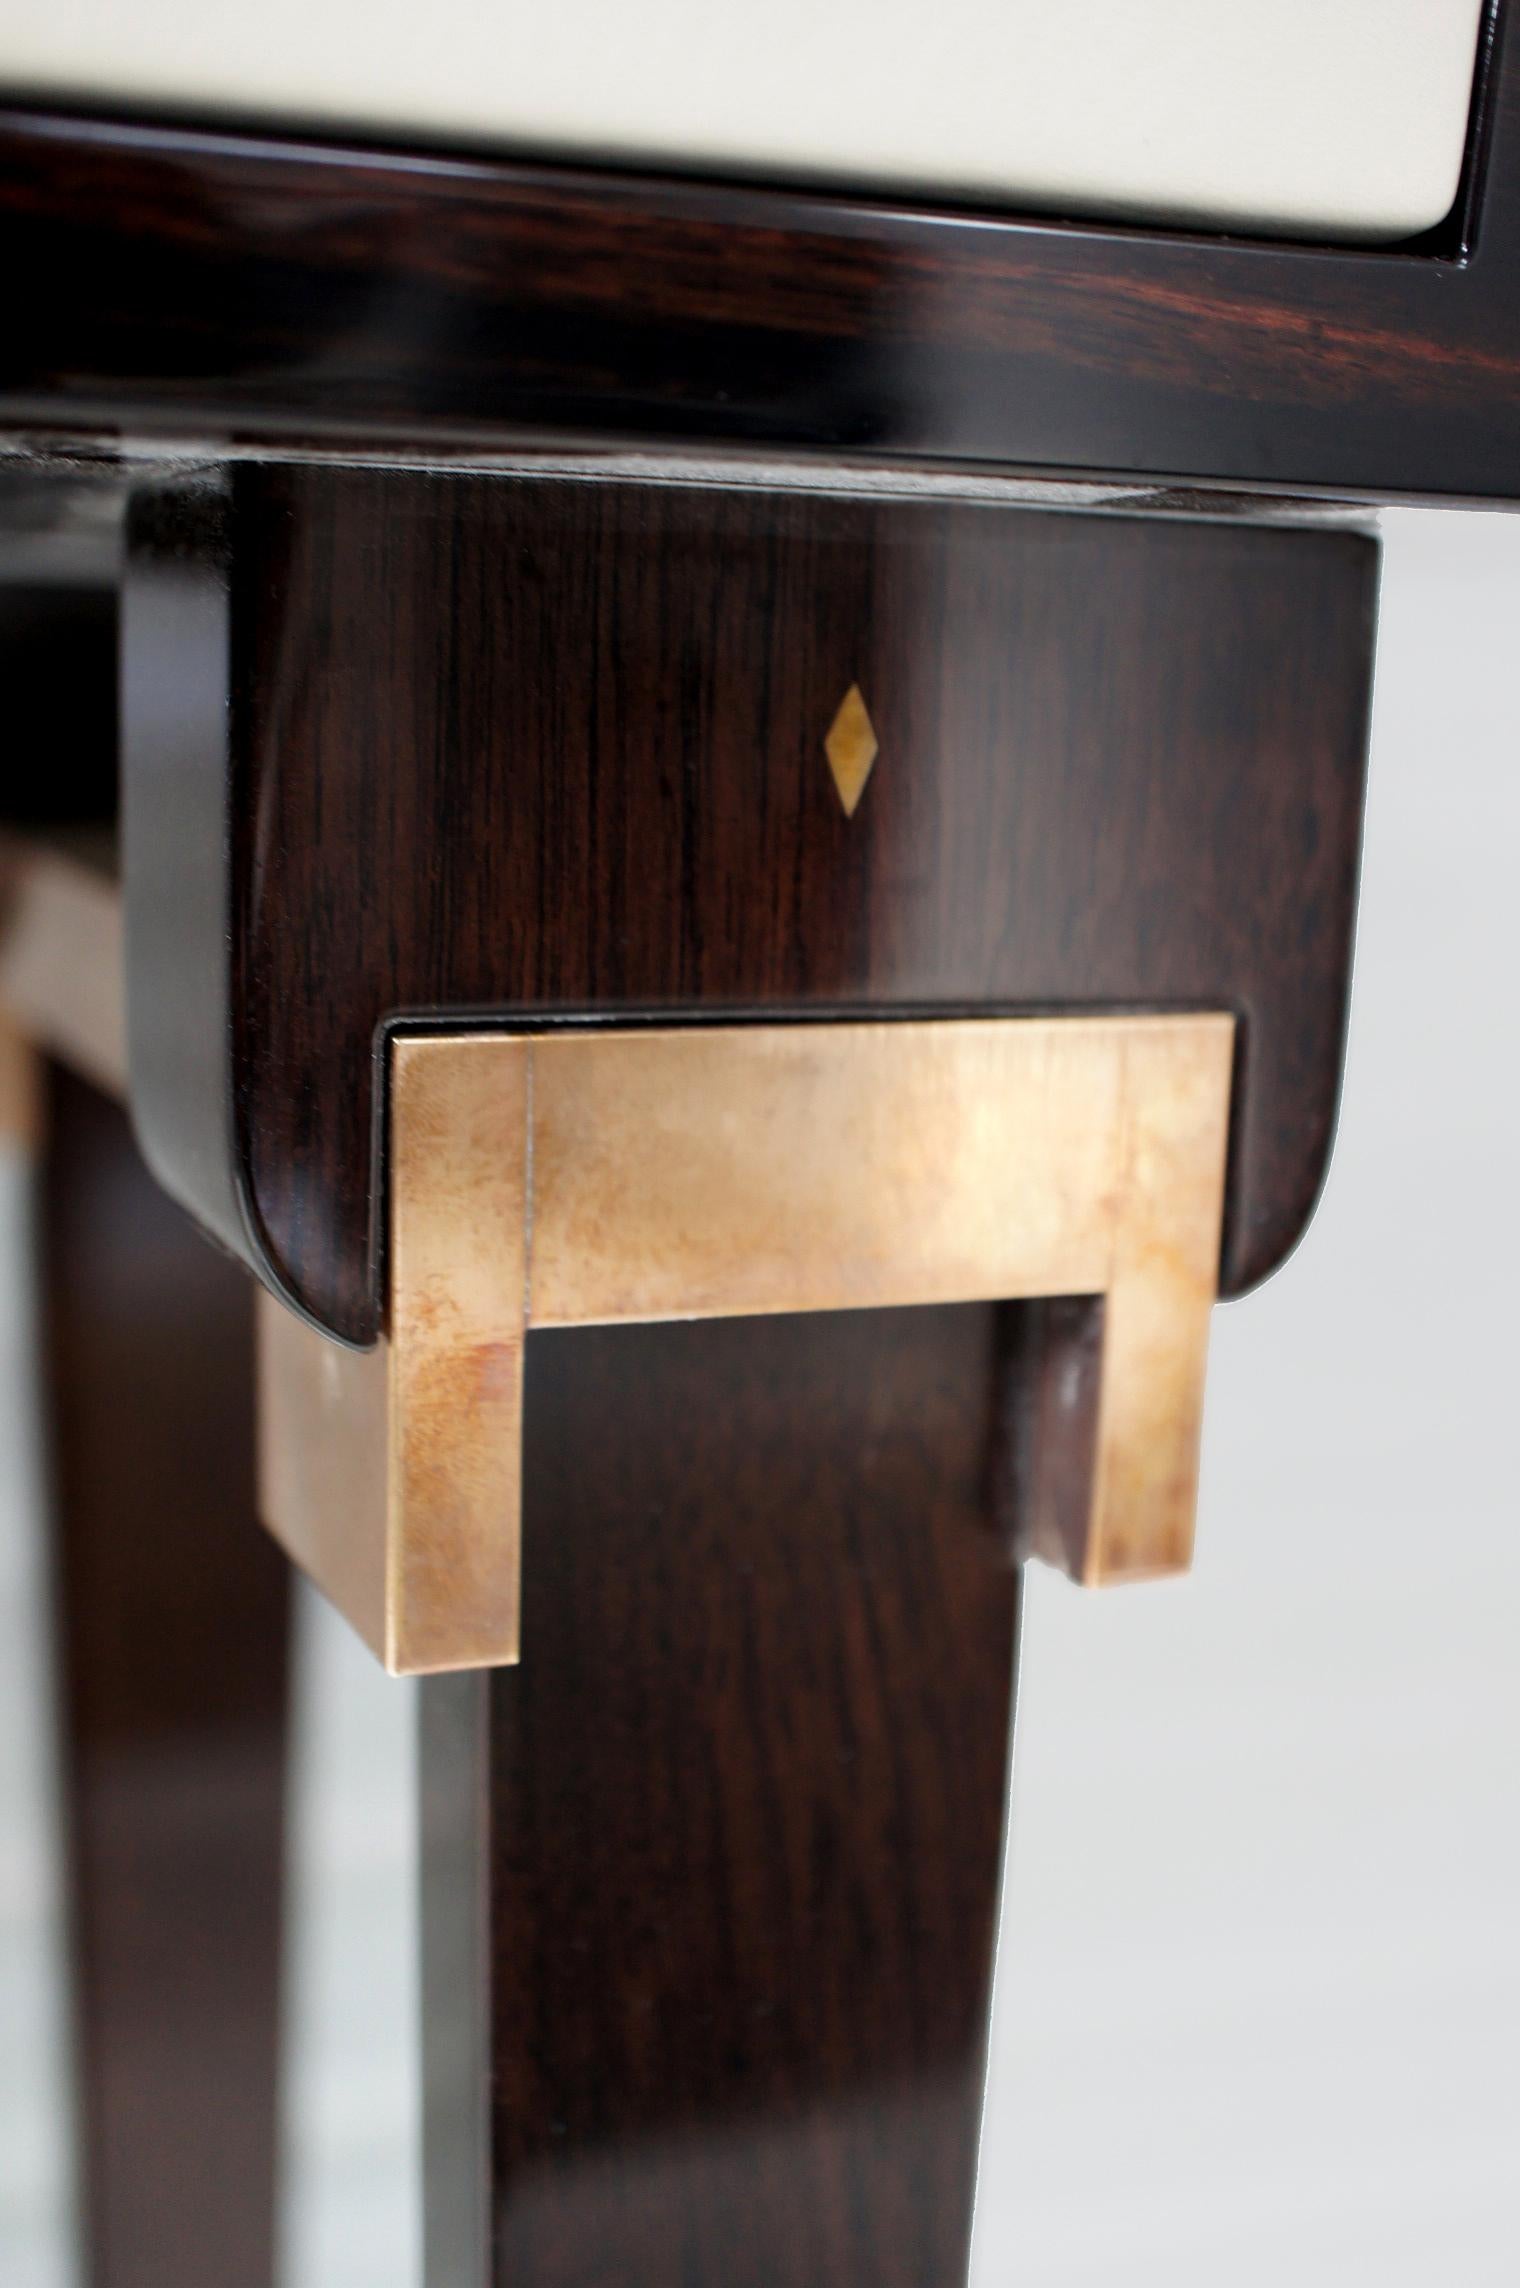 With its simplicity and elegance the Amber Console is handcrafted in Macassar, supported by ebonized English walnut and antique brass detailing. It features a distinctive central wooden panel which is decorated with Macassar inlay in a playful